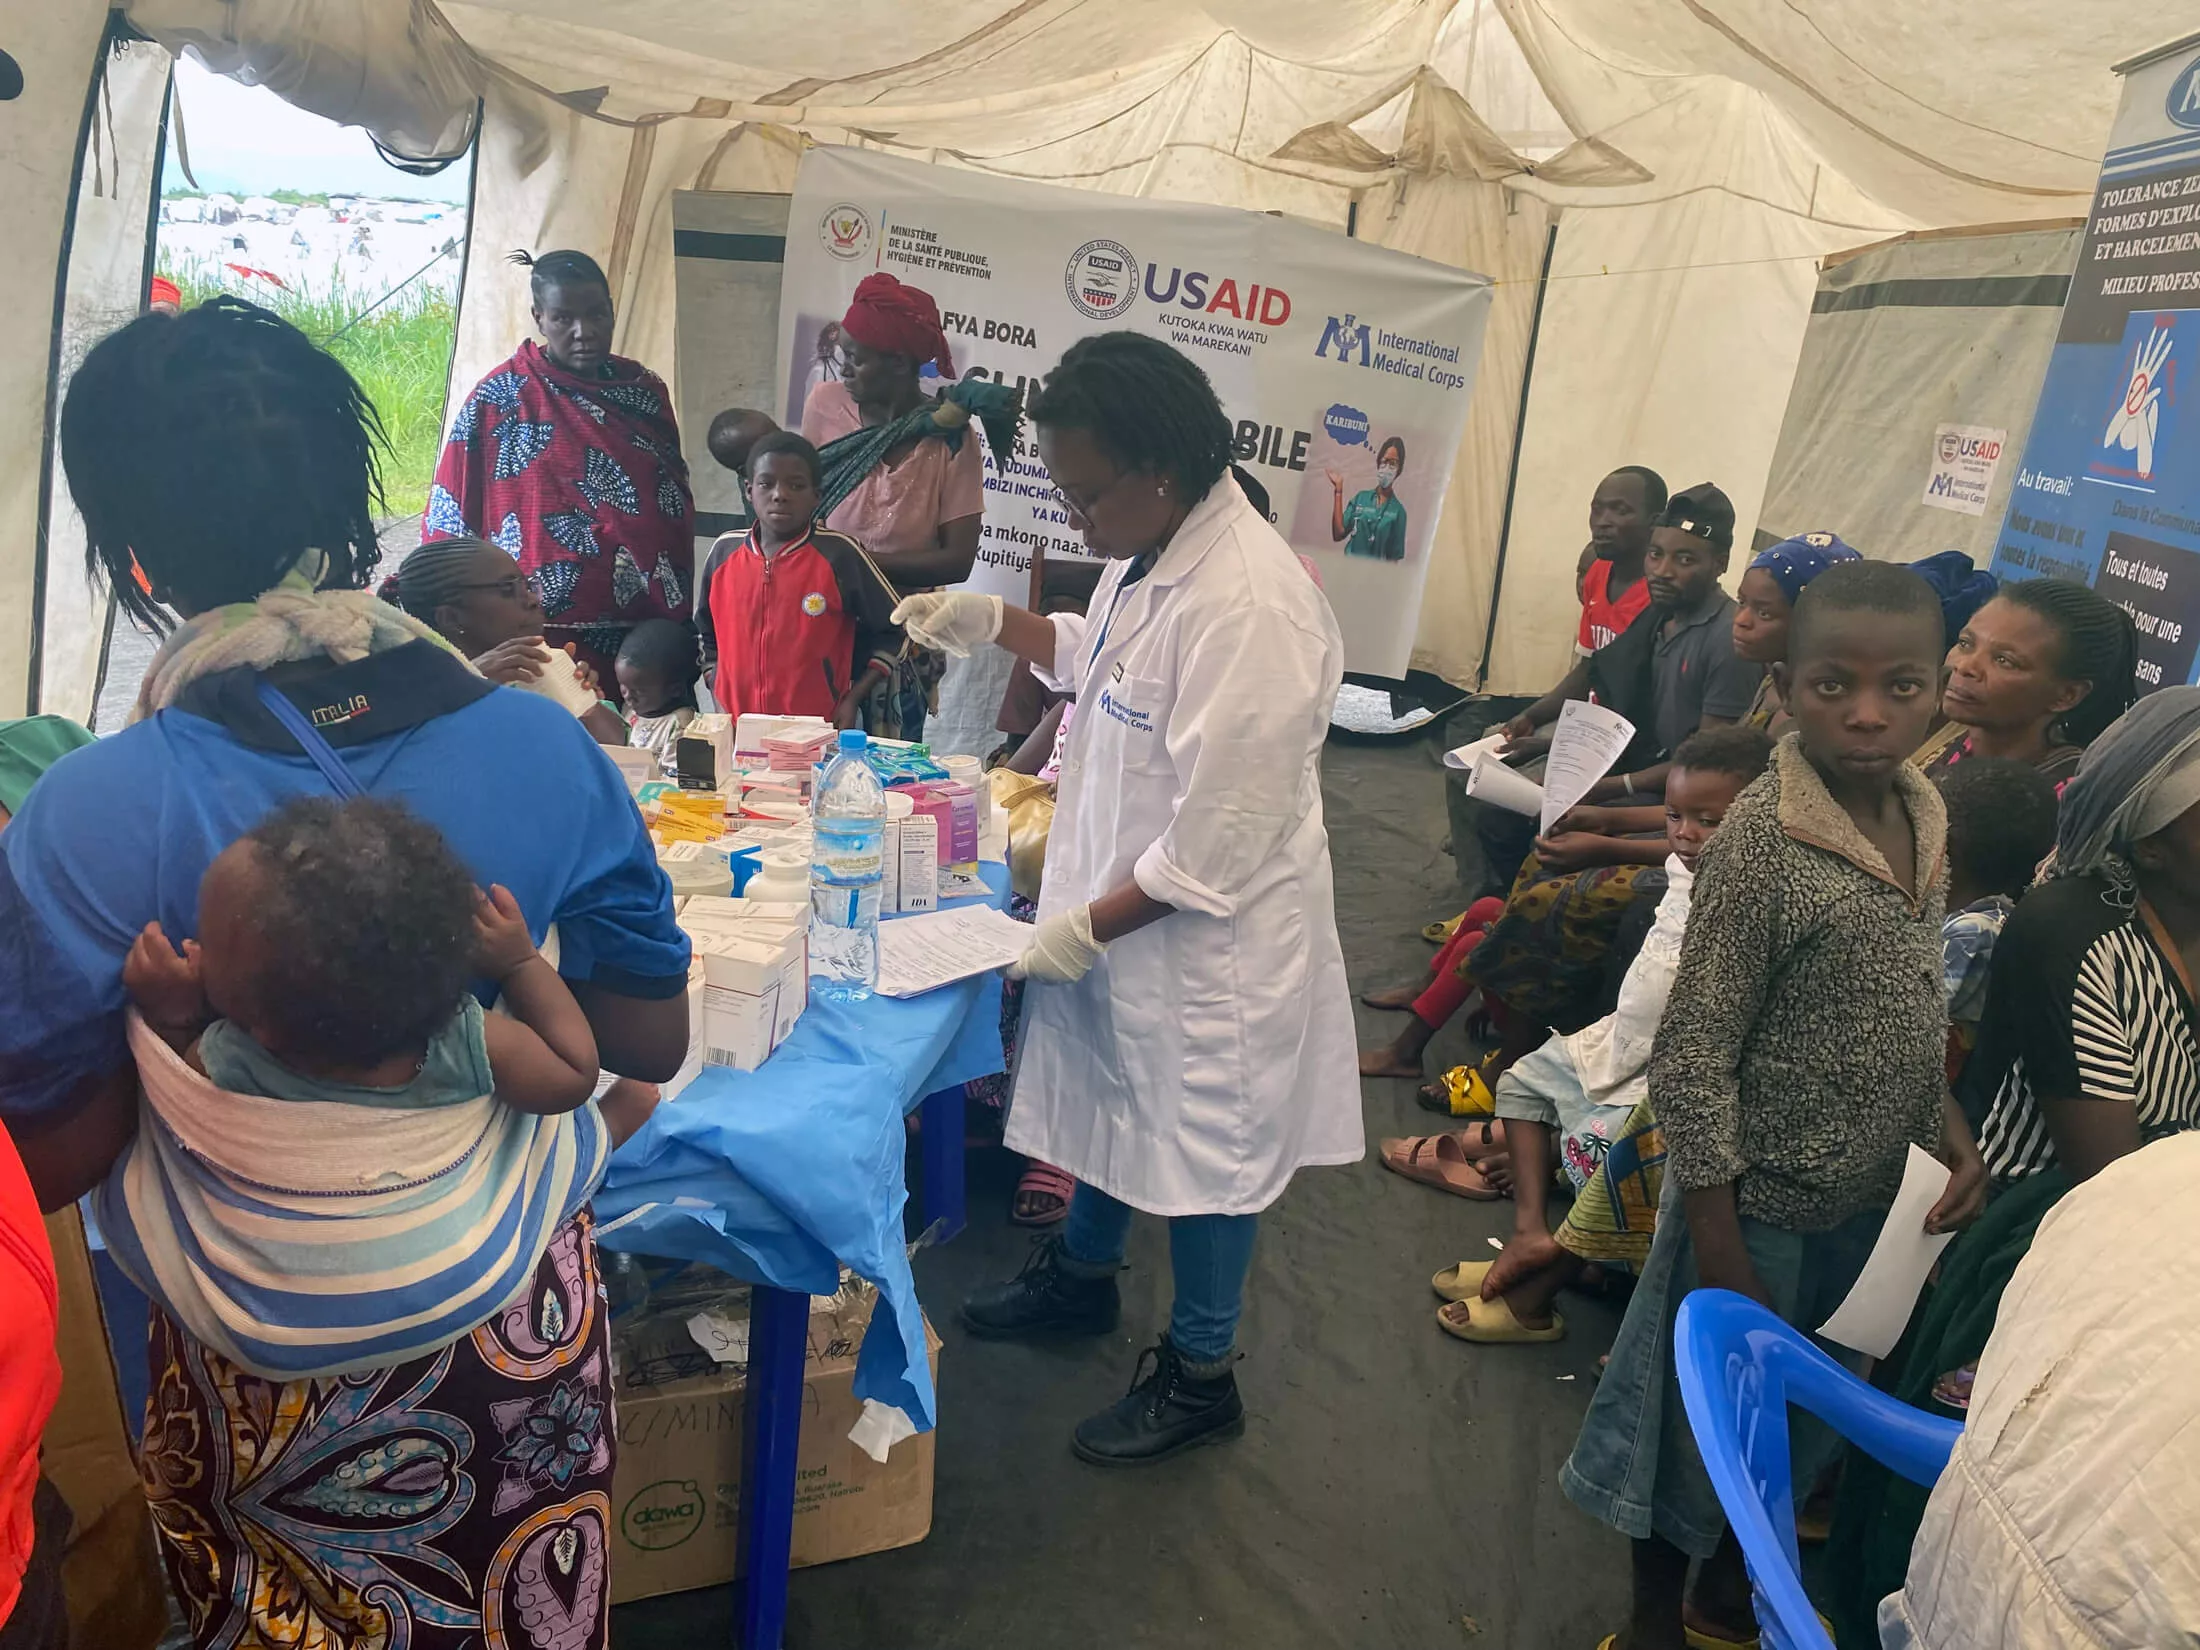 IDPs receive medical care from International Medical Corps staff in response to the ongoing violence in North Kivu.